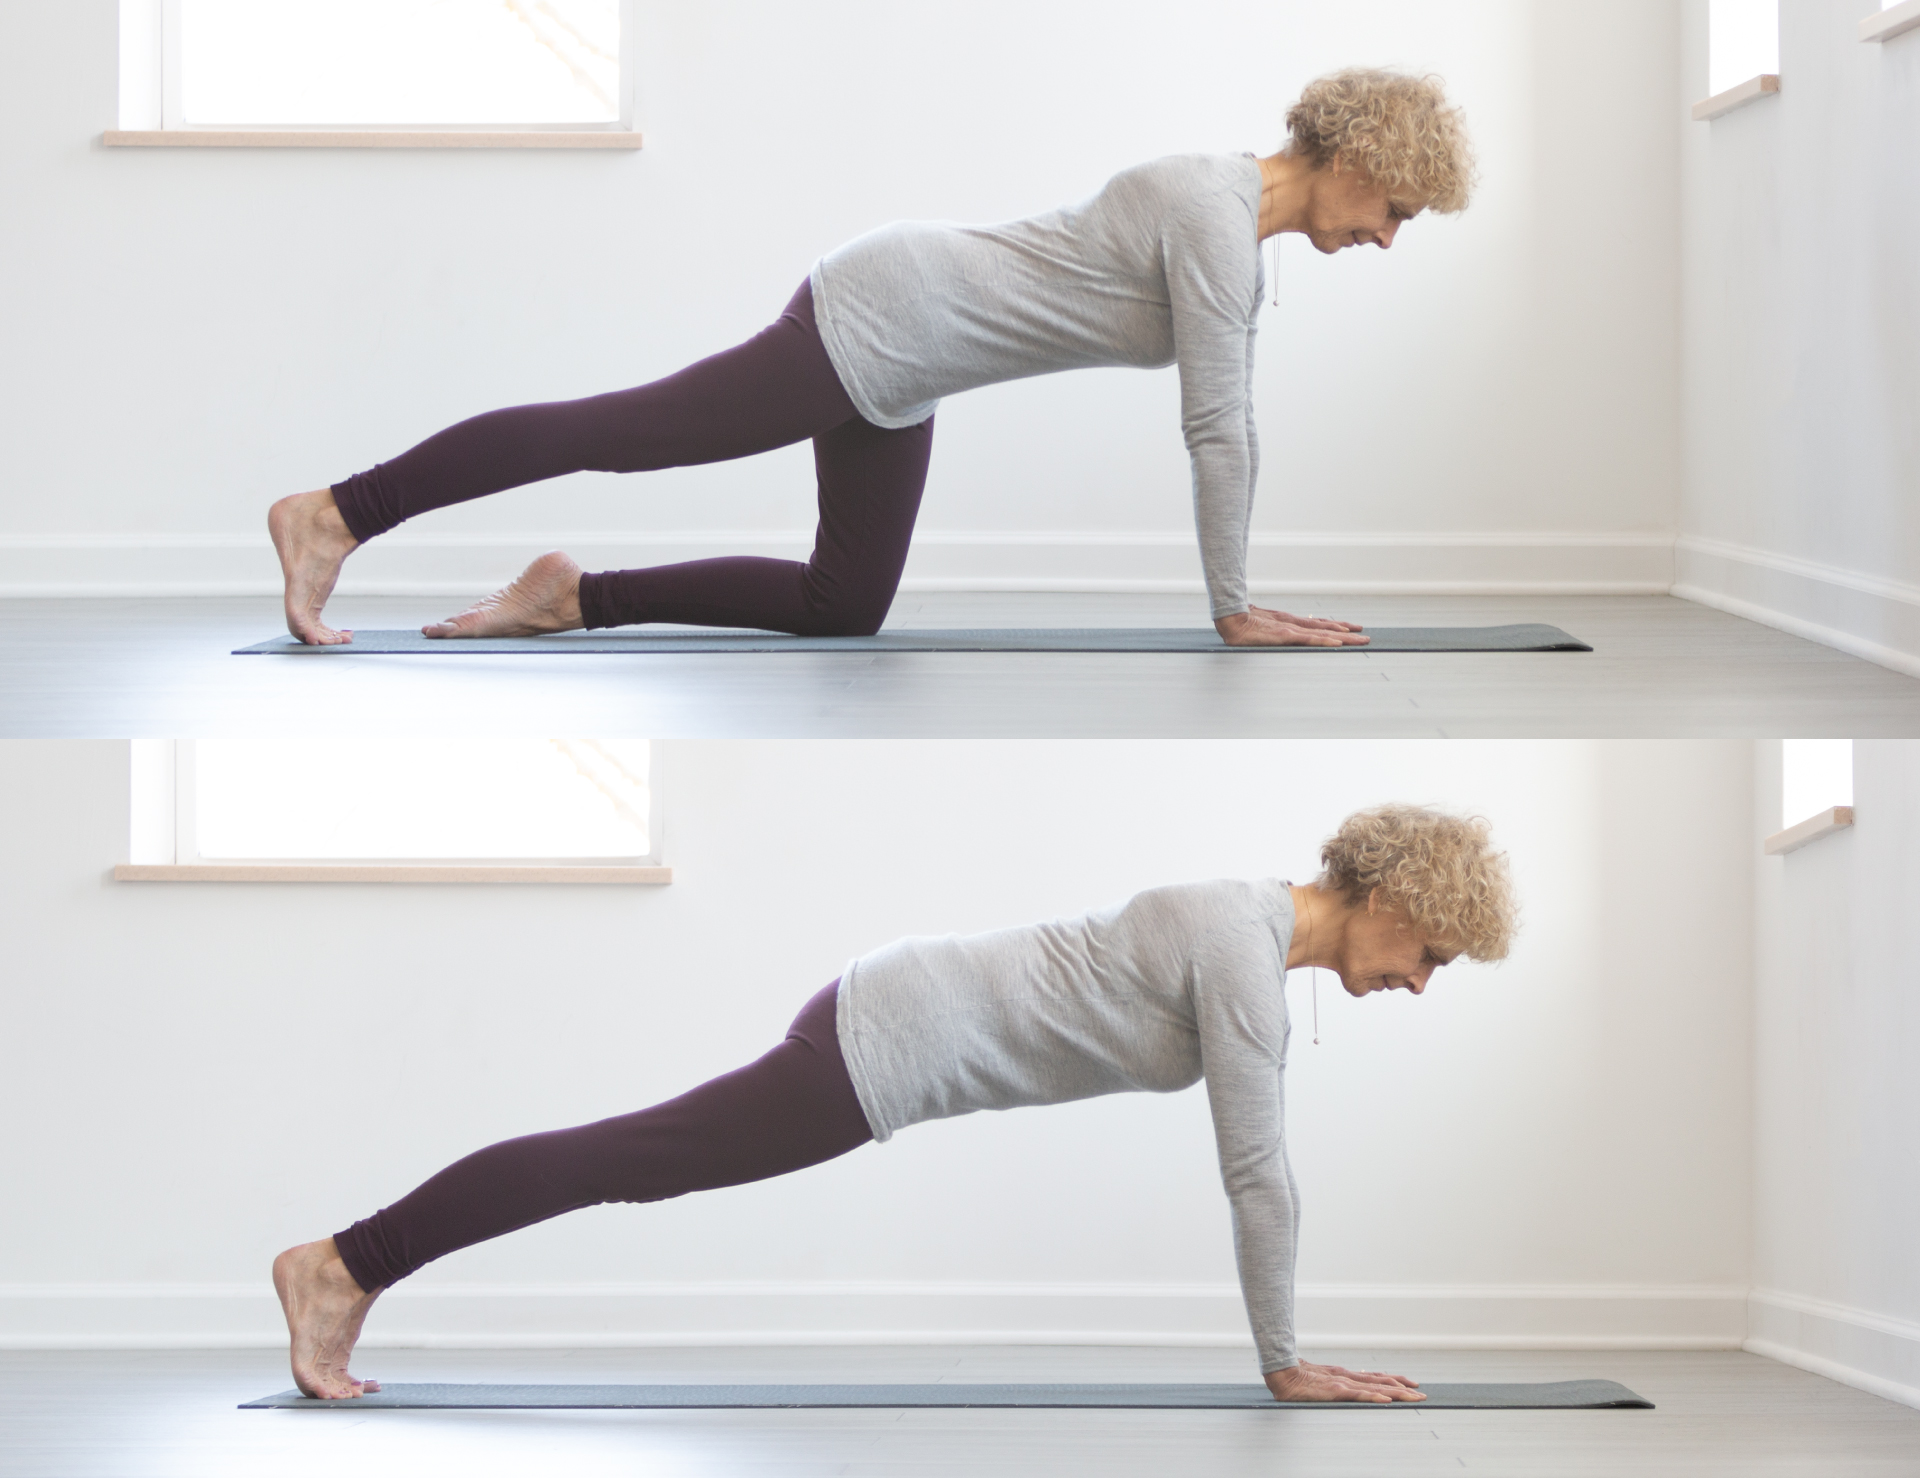 Yoga Poses for Spine Alignment and Mobility - Yoga Journal